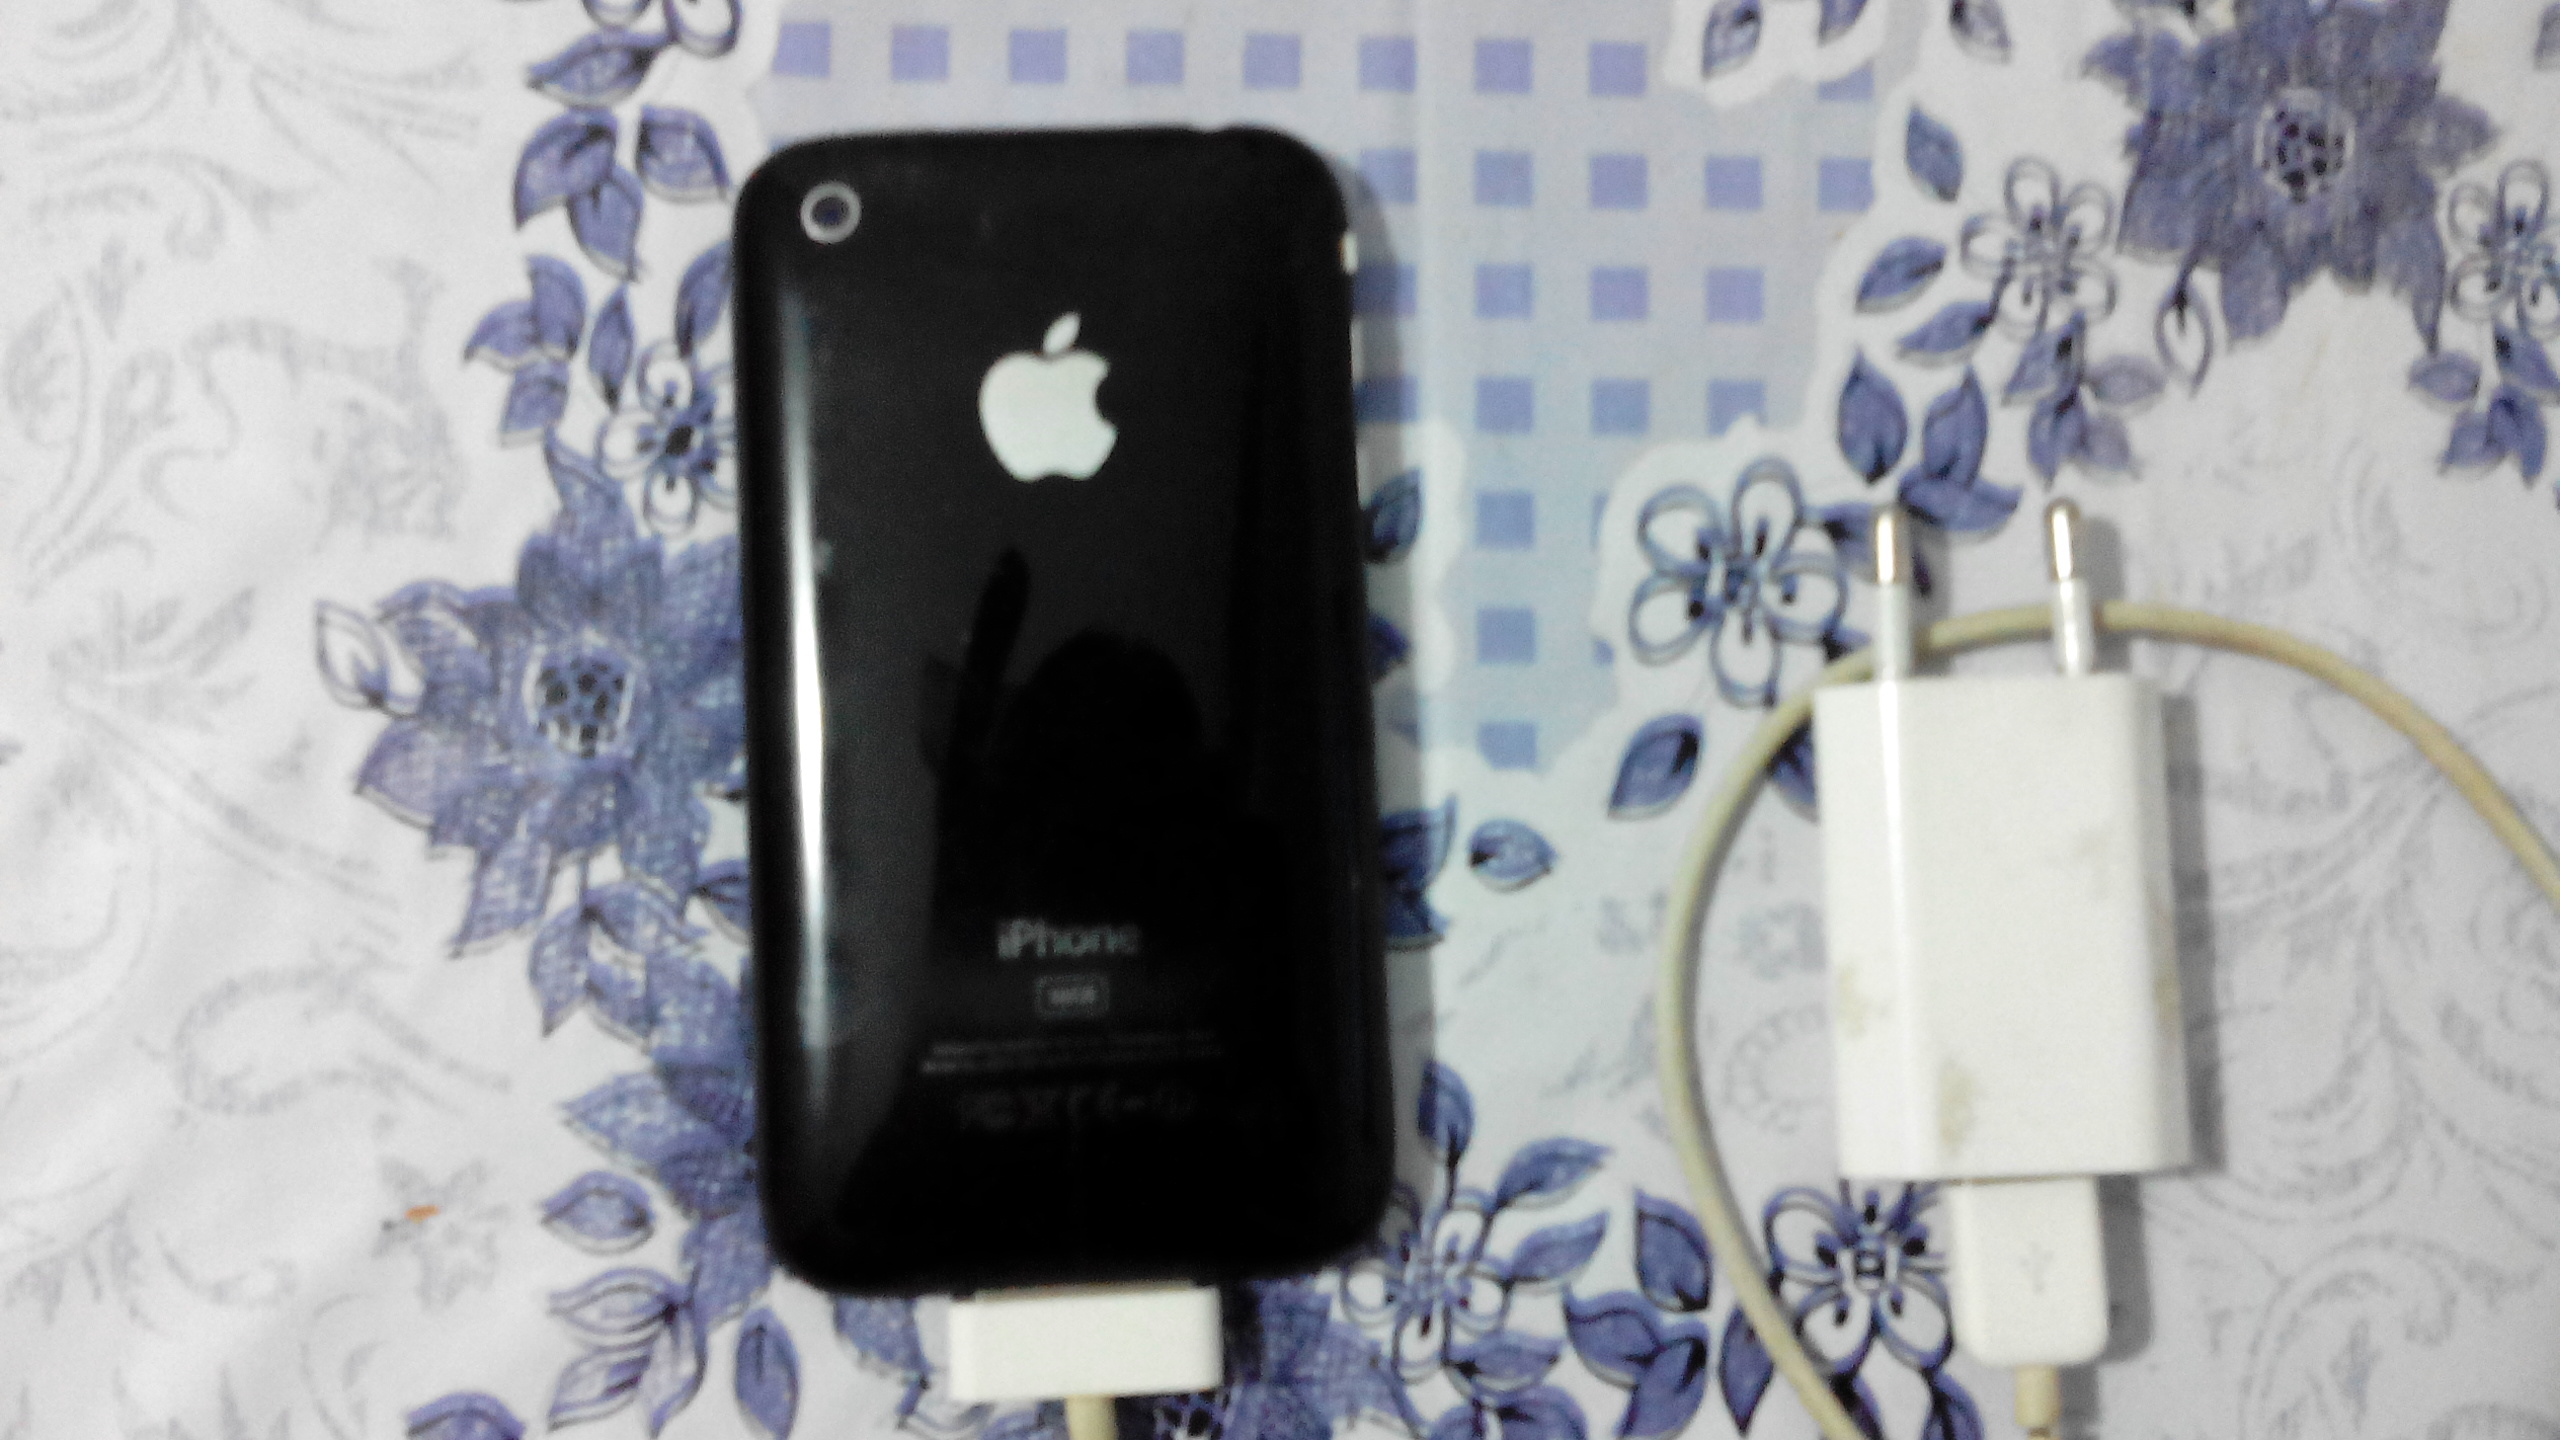 Apple Iphone 3Gs for Rs. 4000 only2560 x 1440